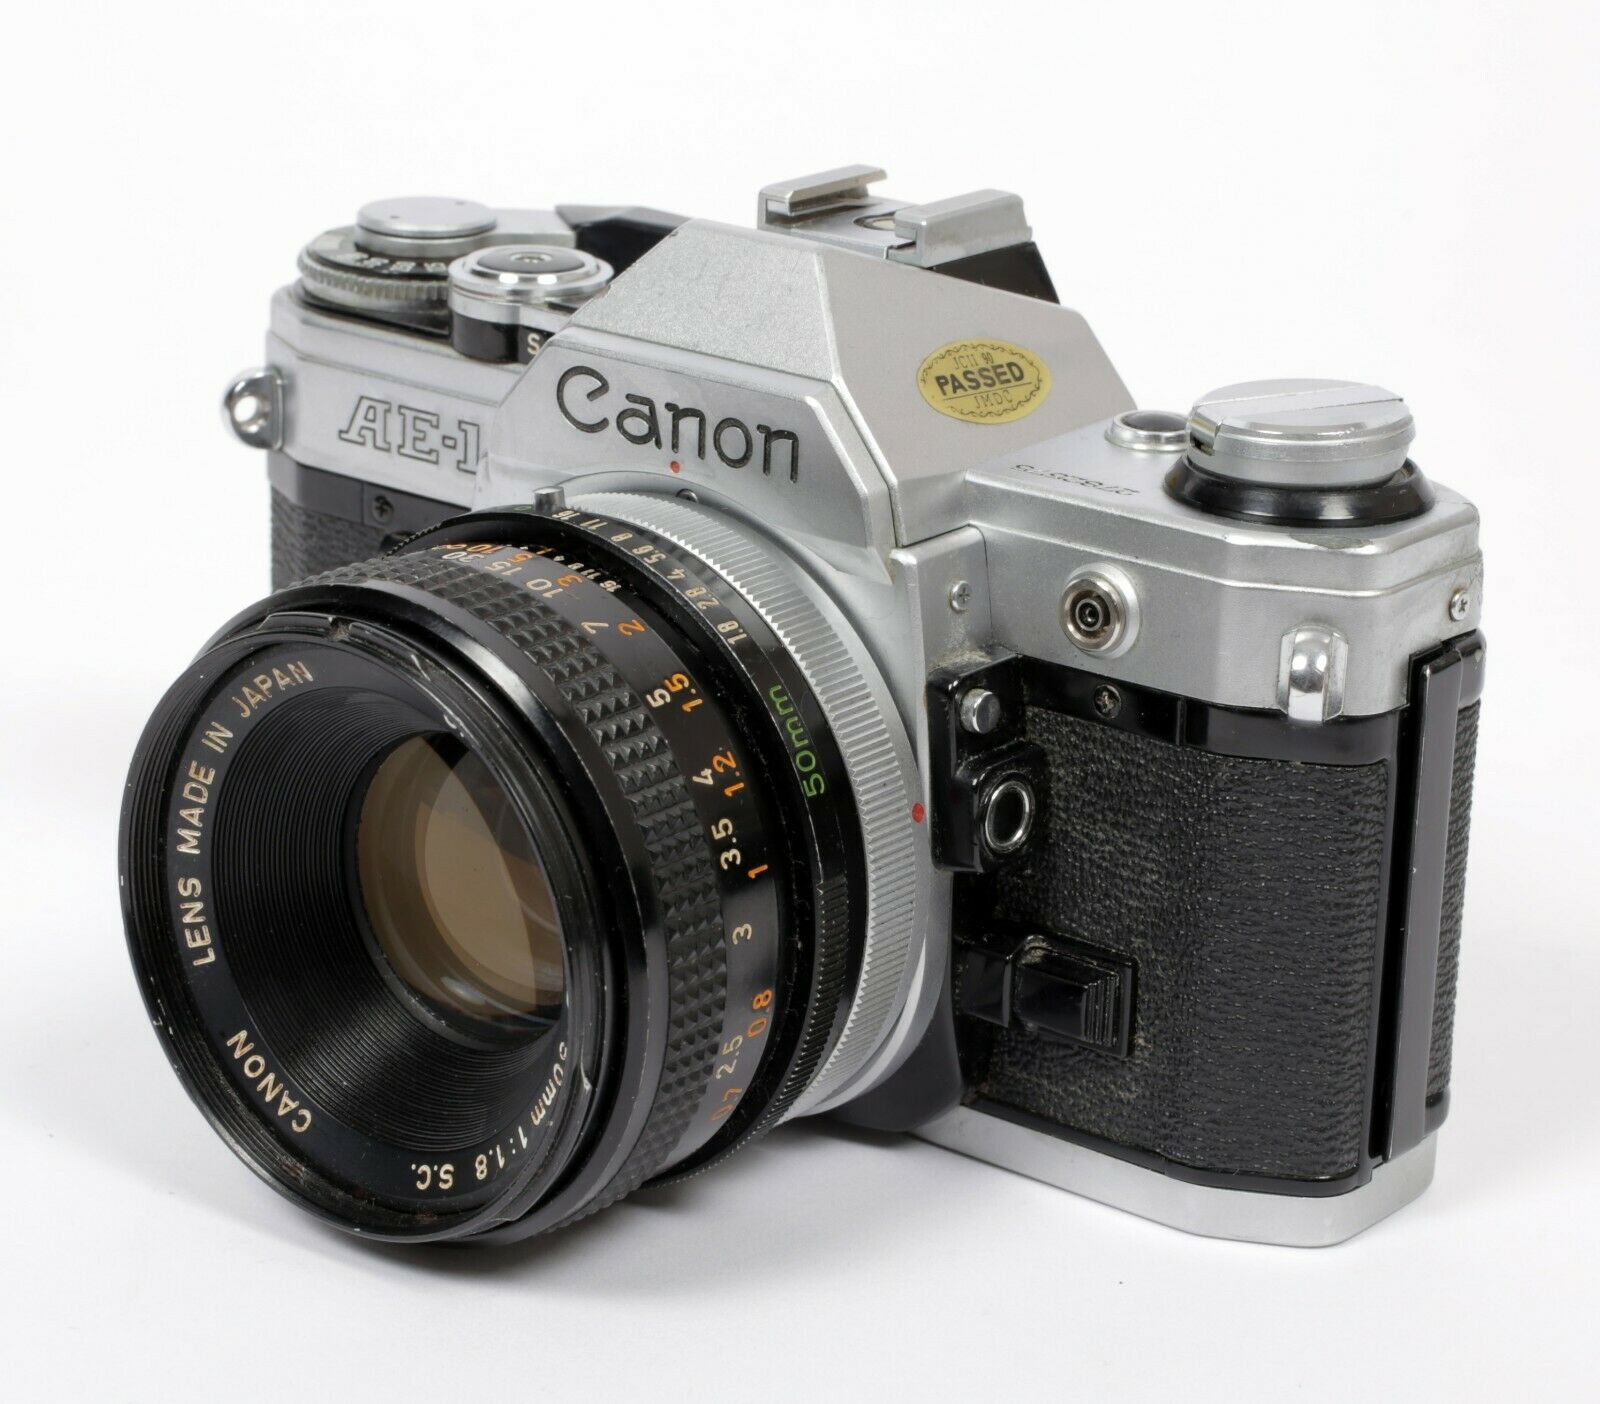 CANON AE-1 35mm SLR Film Camera with FD 50mm F1.8 Lens